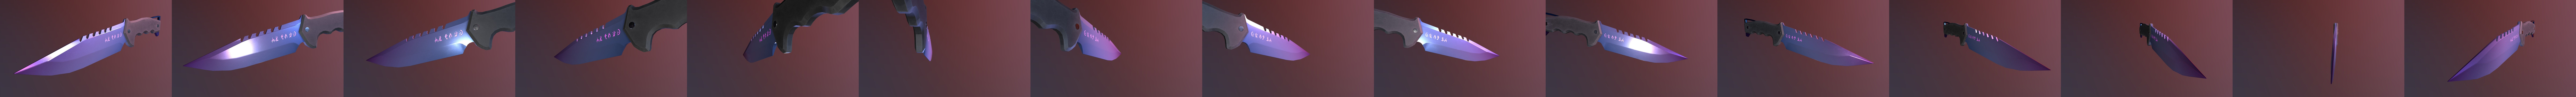 Valorant Knife Download Free 3d Model By Pureugliness Pureugliness C1aee